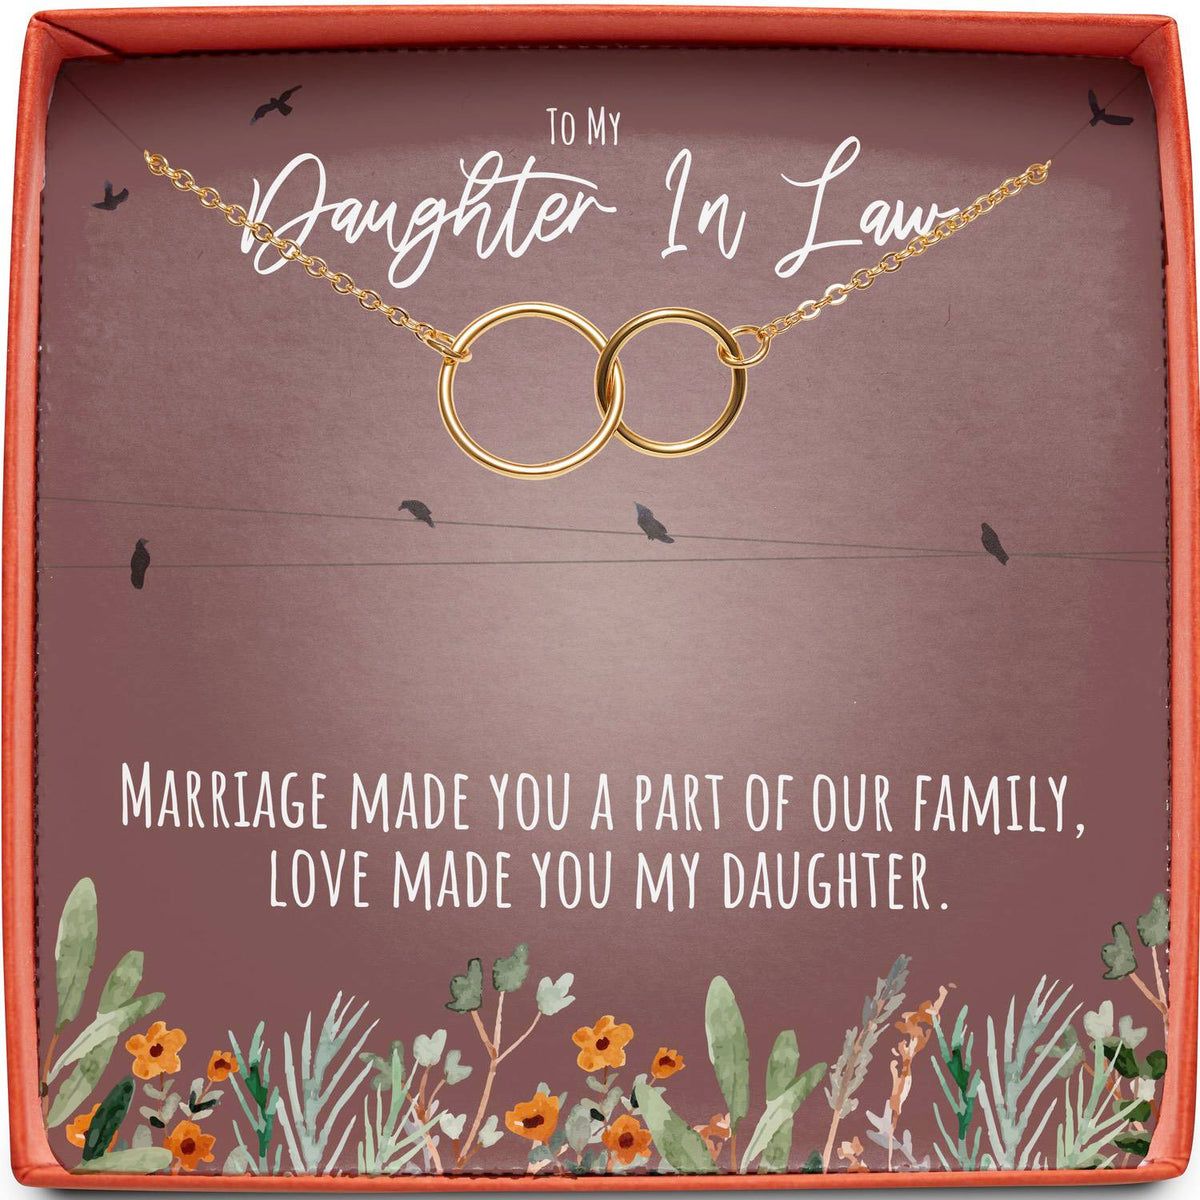 To My Daughter In Law | Love Made You My Daughter | Interlocking Circles